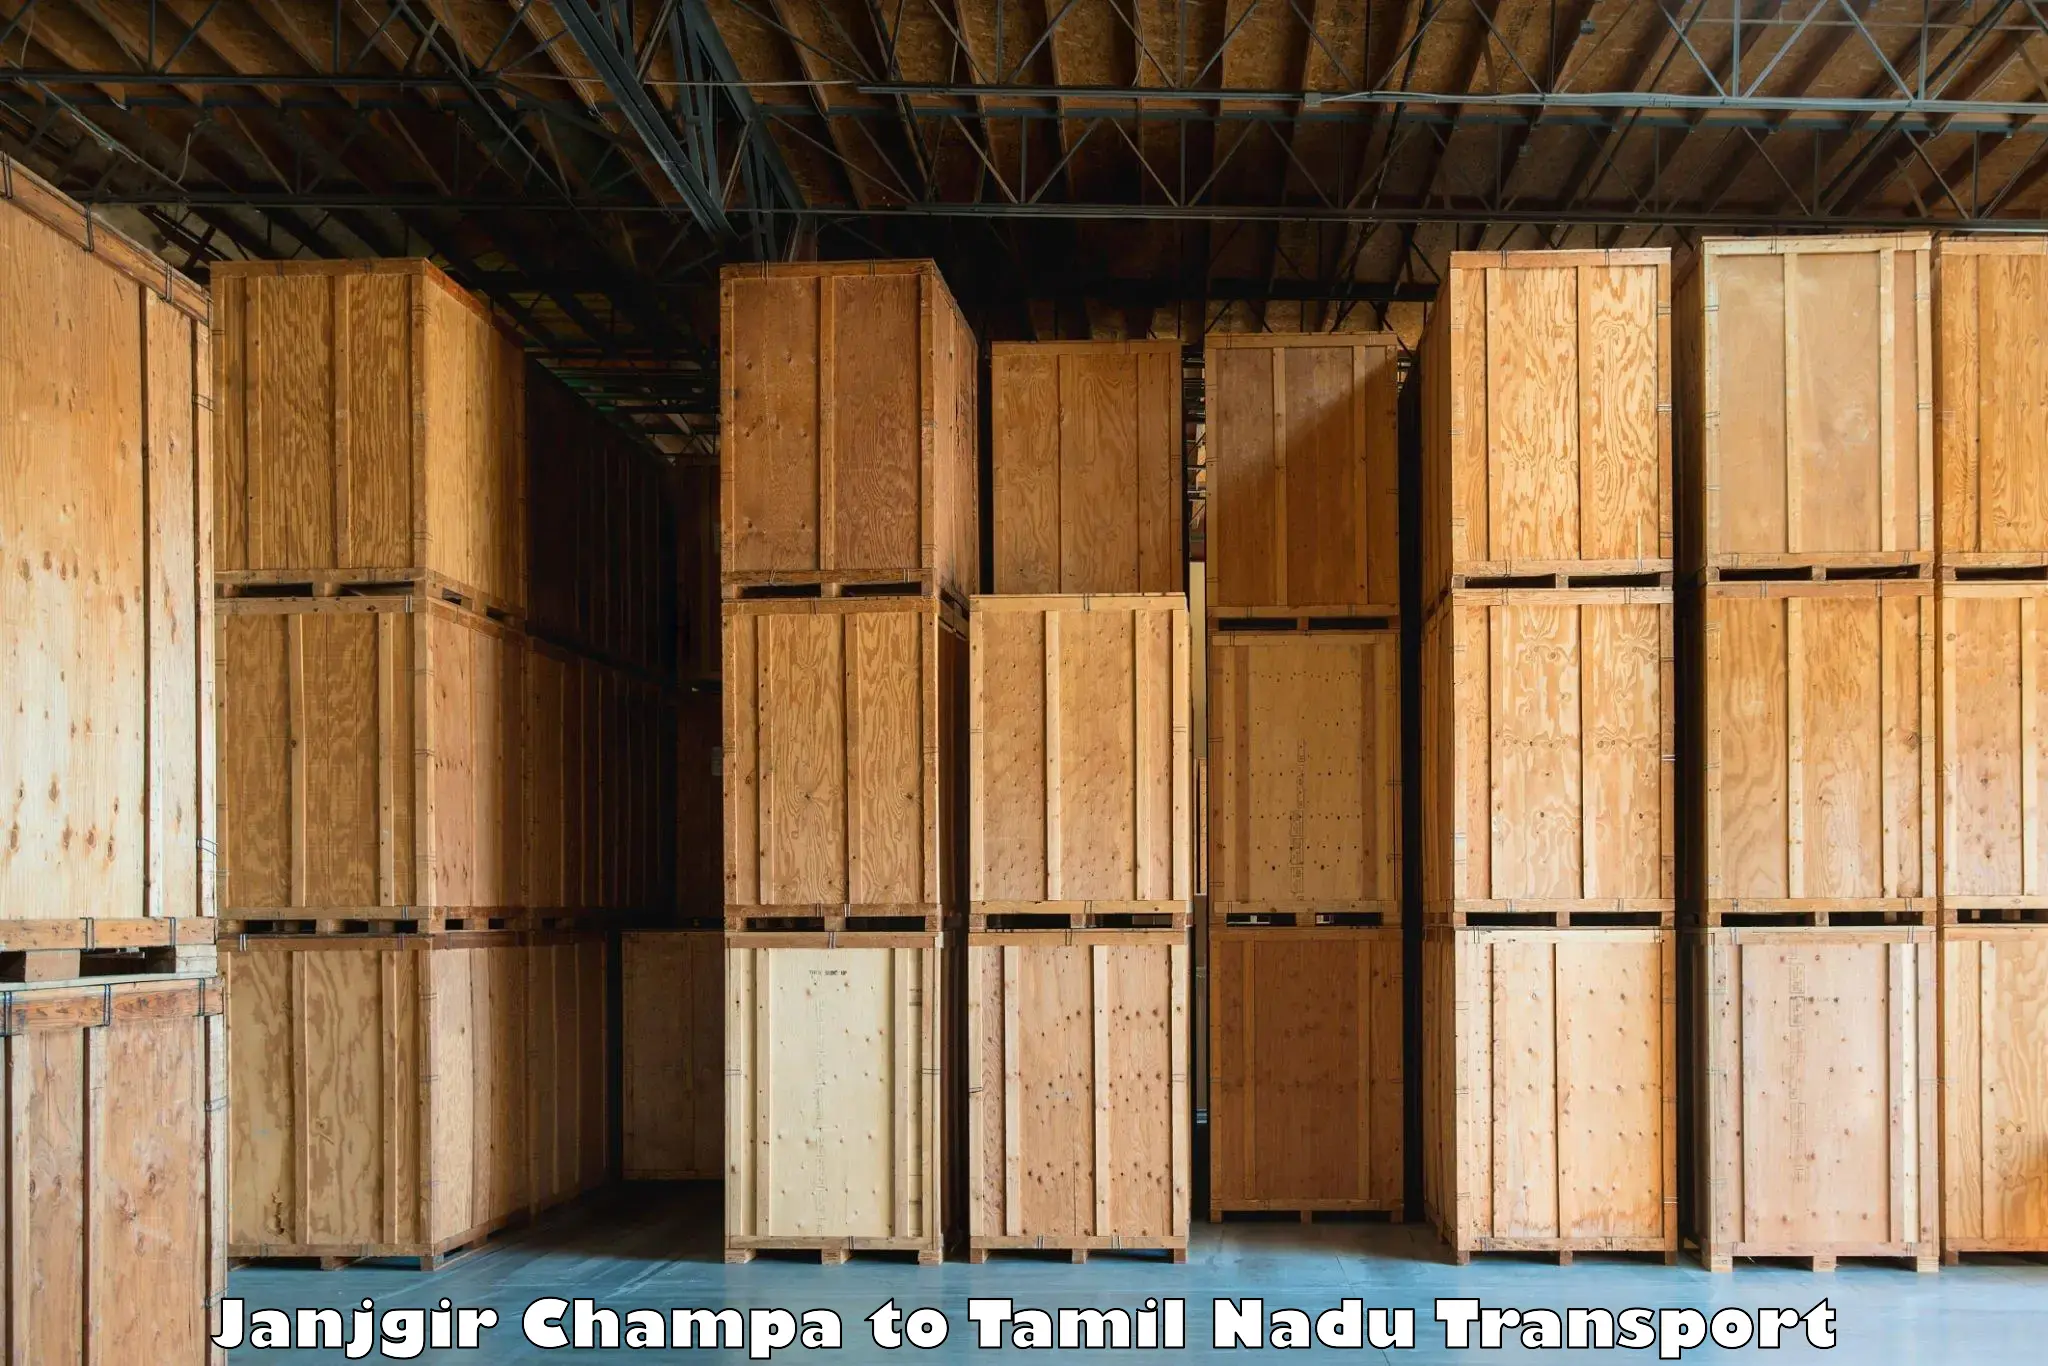 Material transport services Janjgir Champa to Trichy